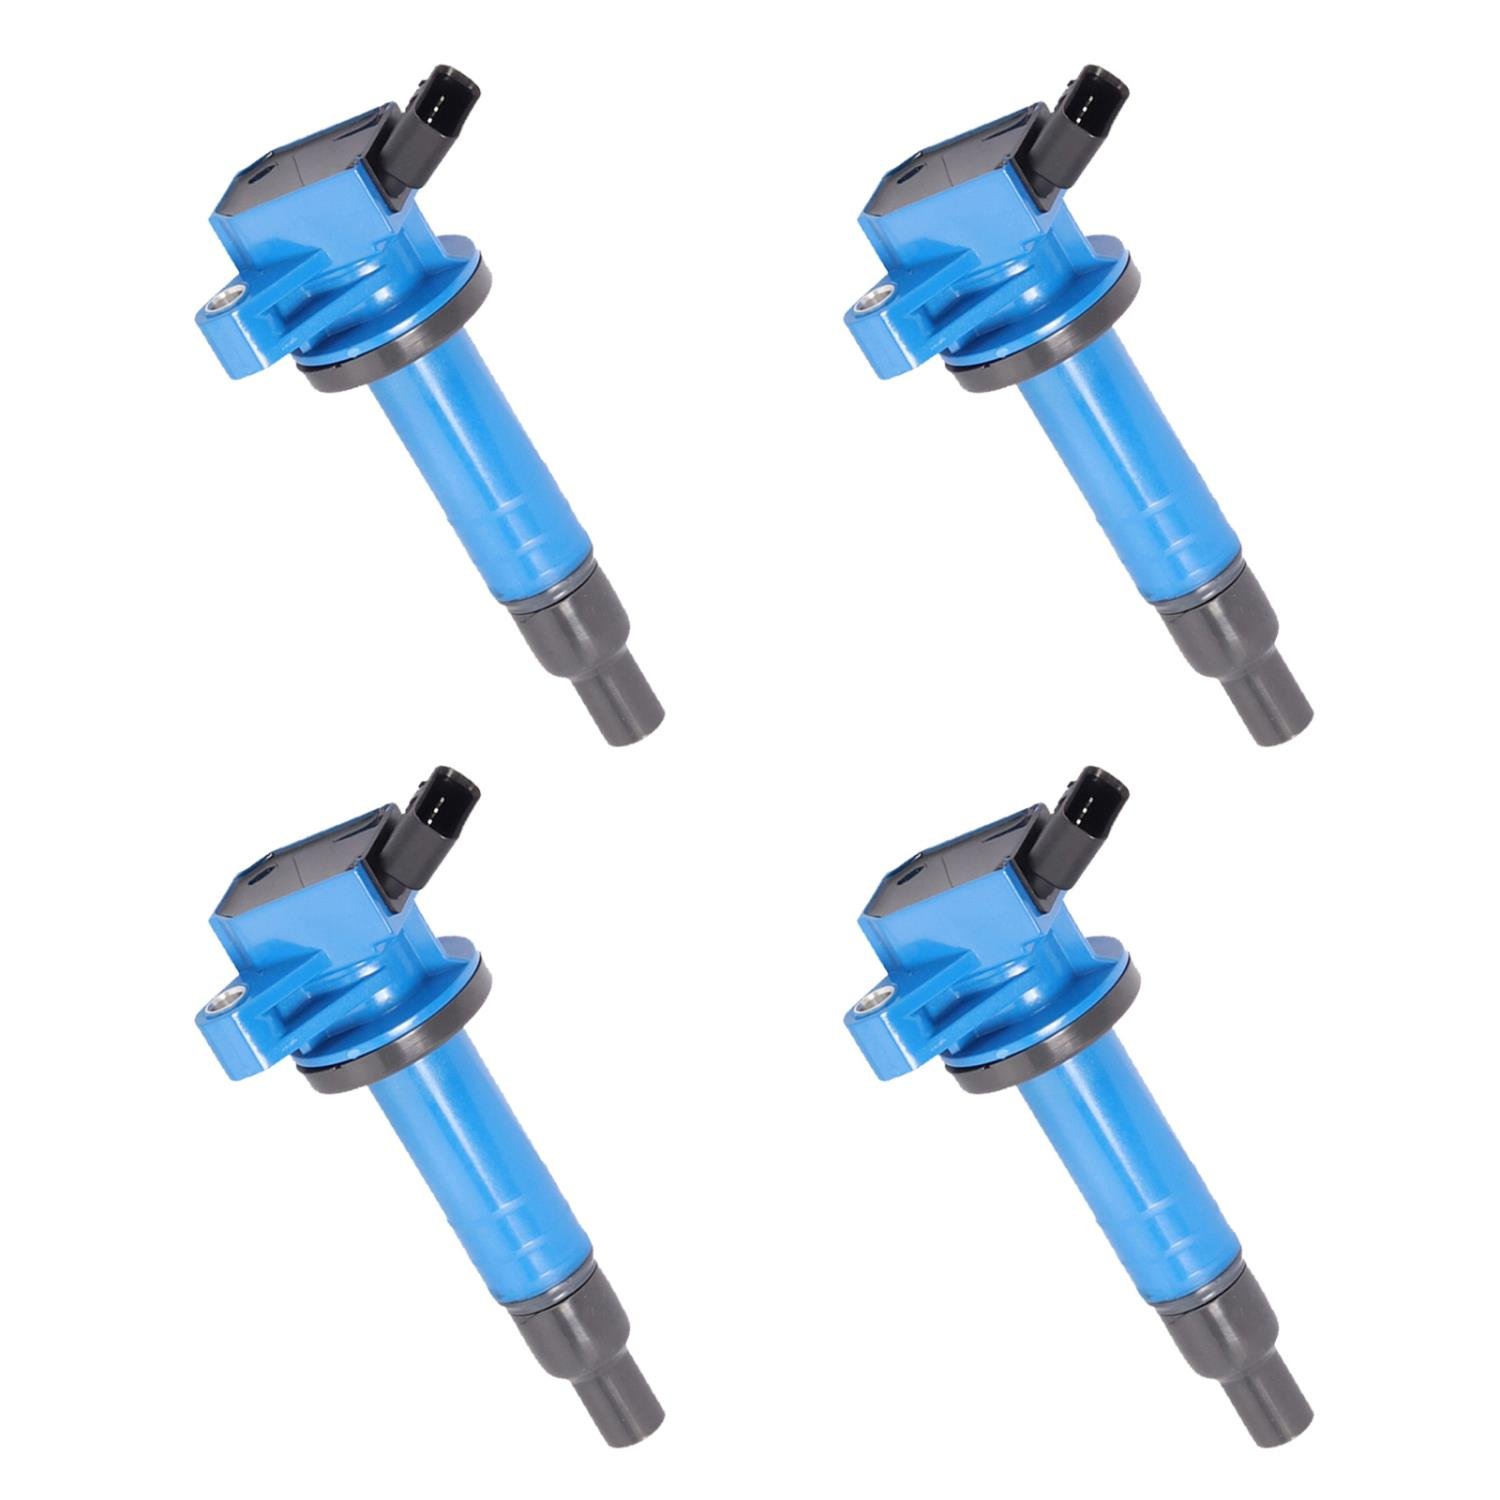 High-Performance Ignition Coils for Toyota Celica, Chevy Prizm